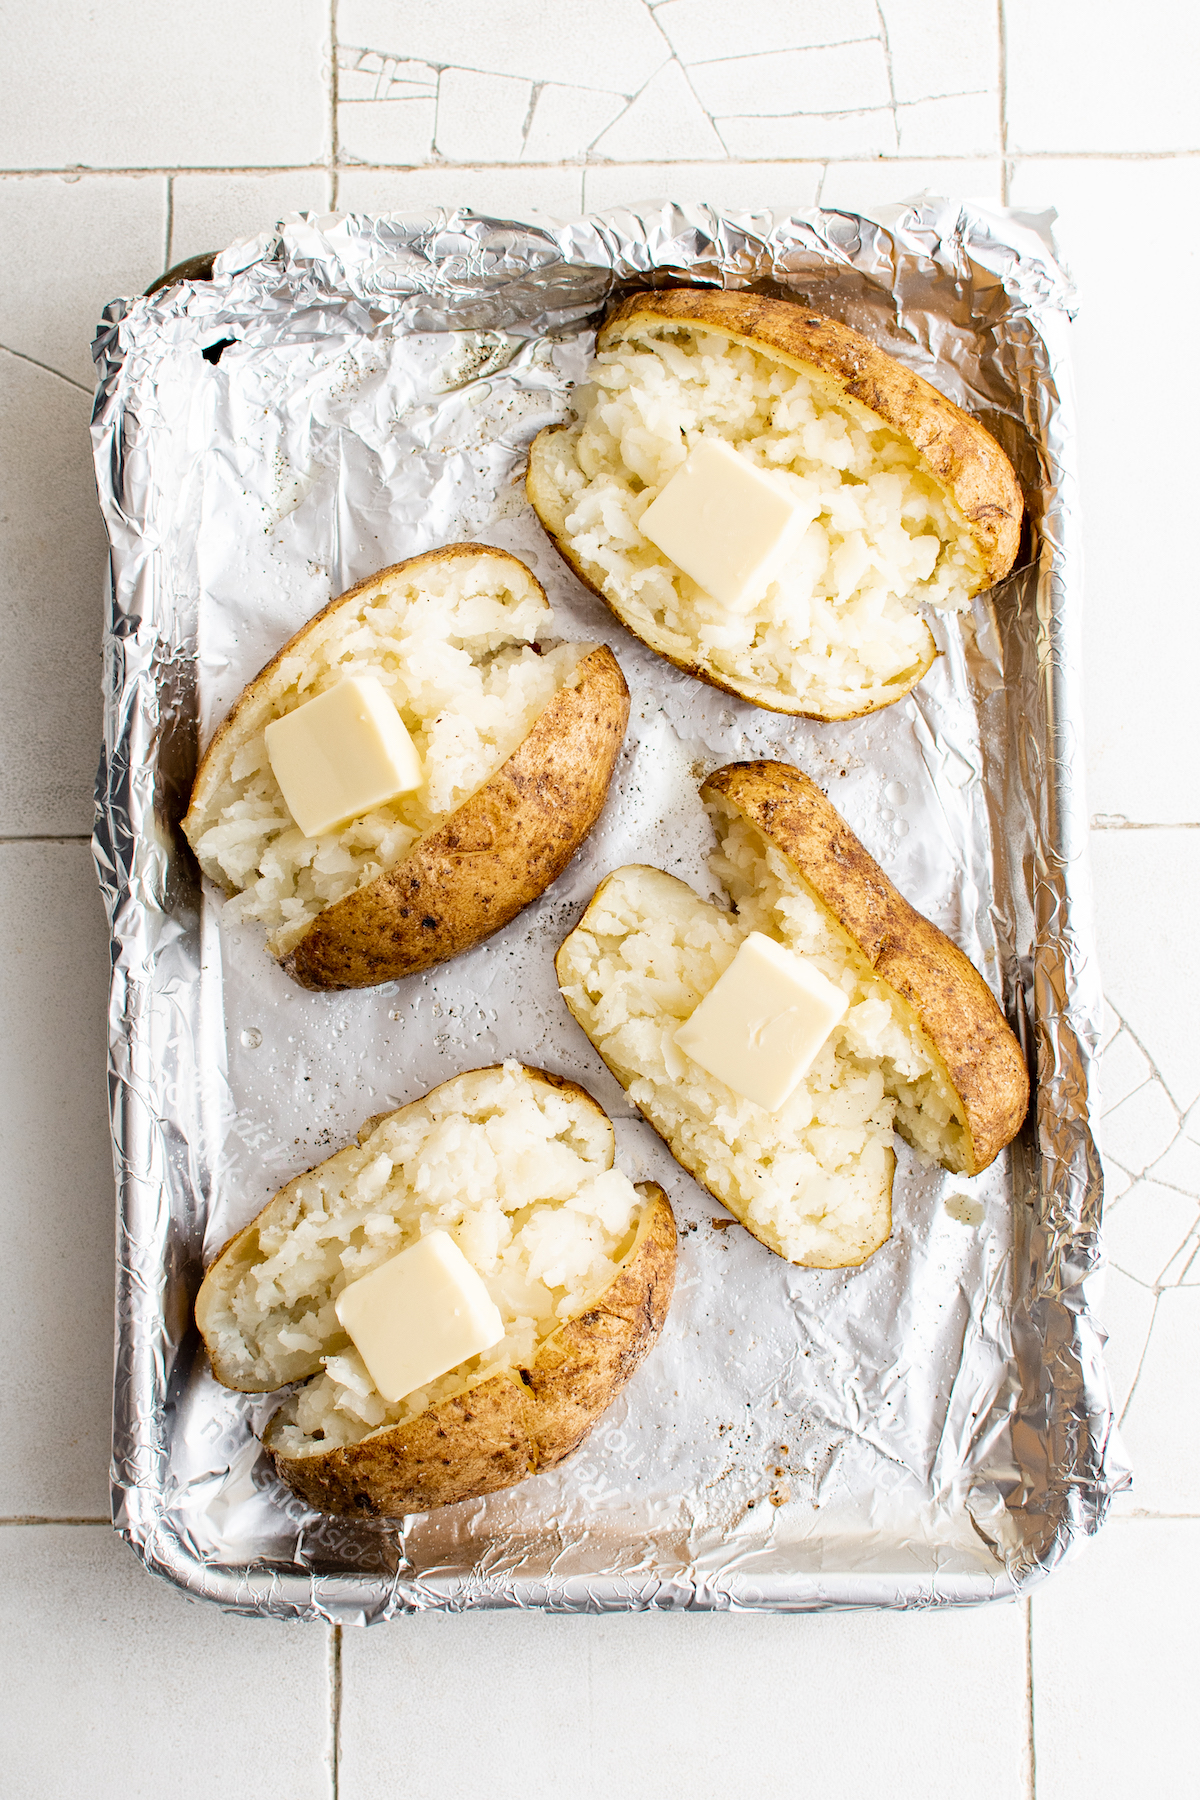 Baked potato recipe with butter on each potato.